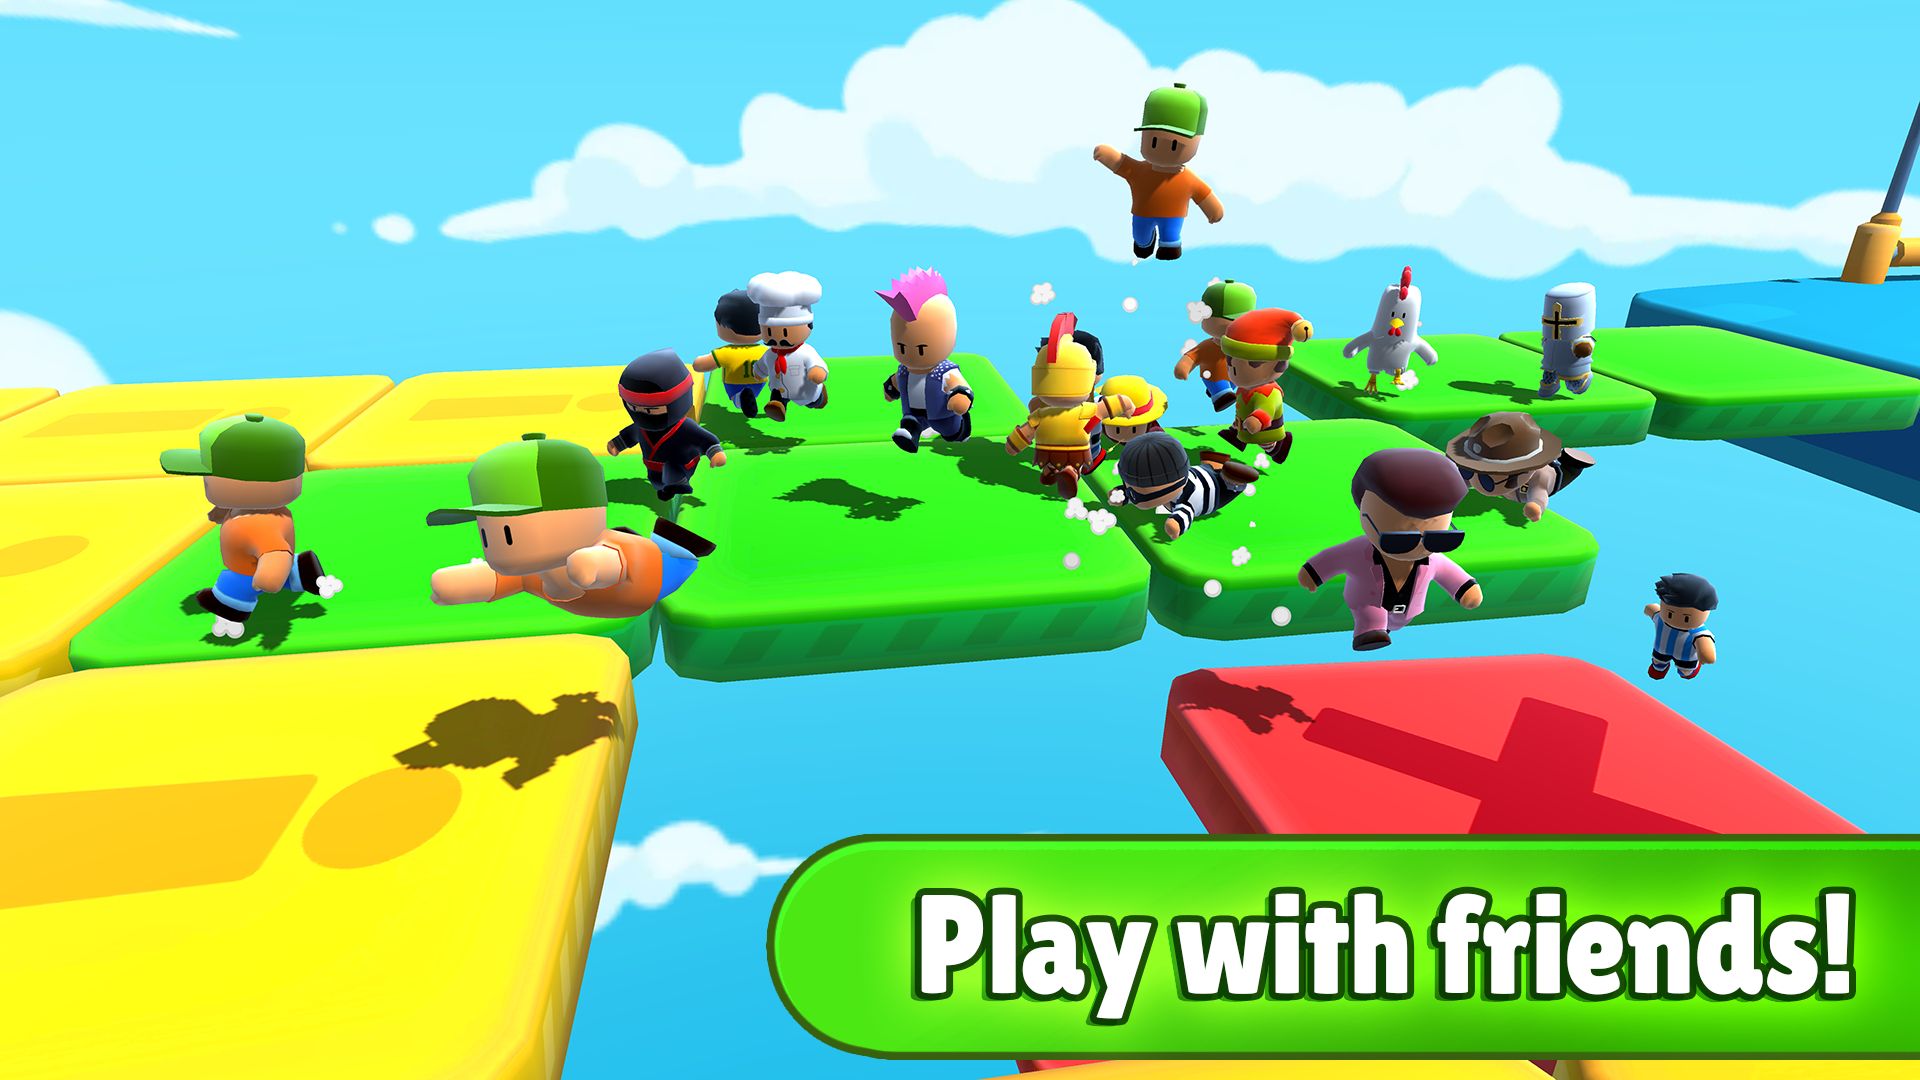 game-battle-royale-terbaik-di-android-stumble-guys-play-with-friends